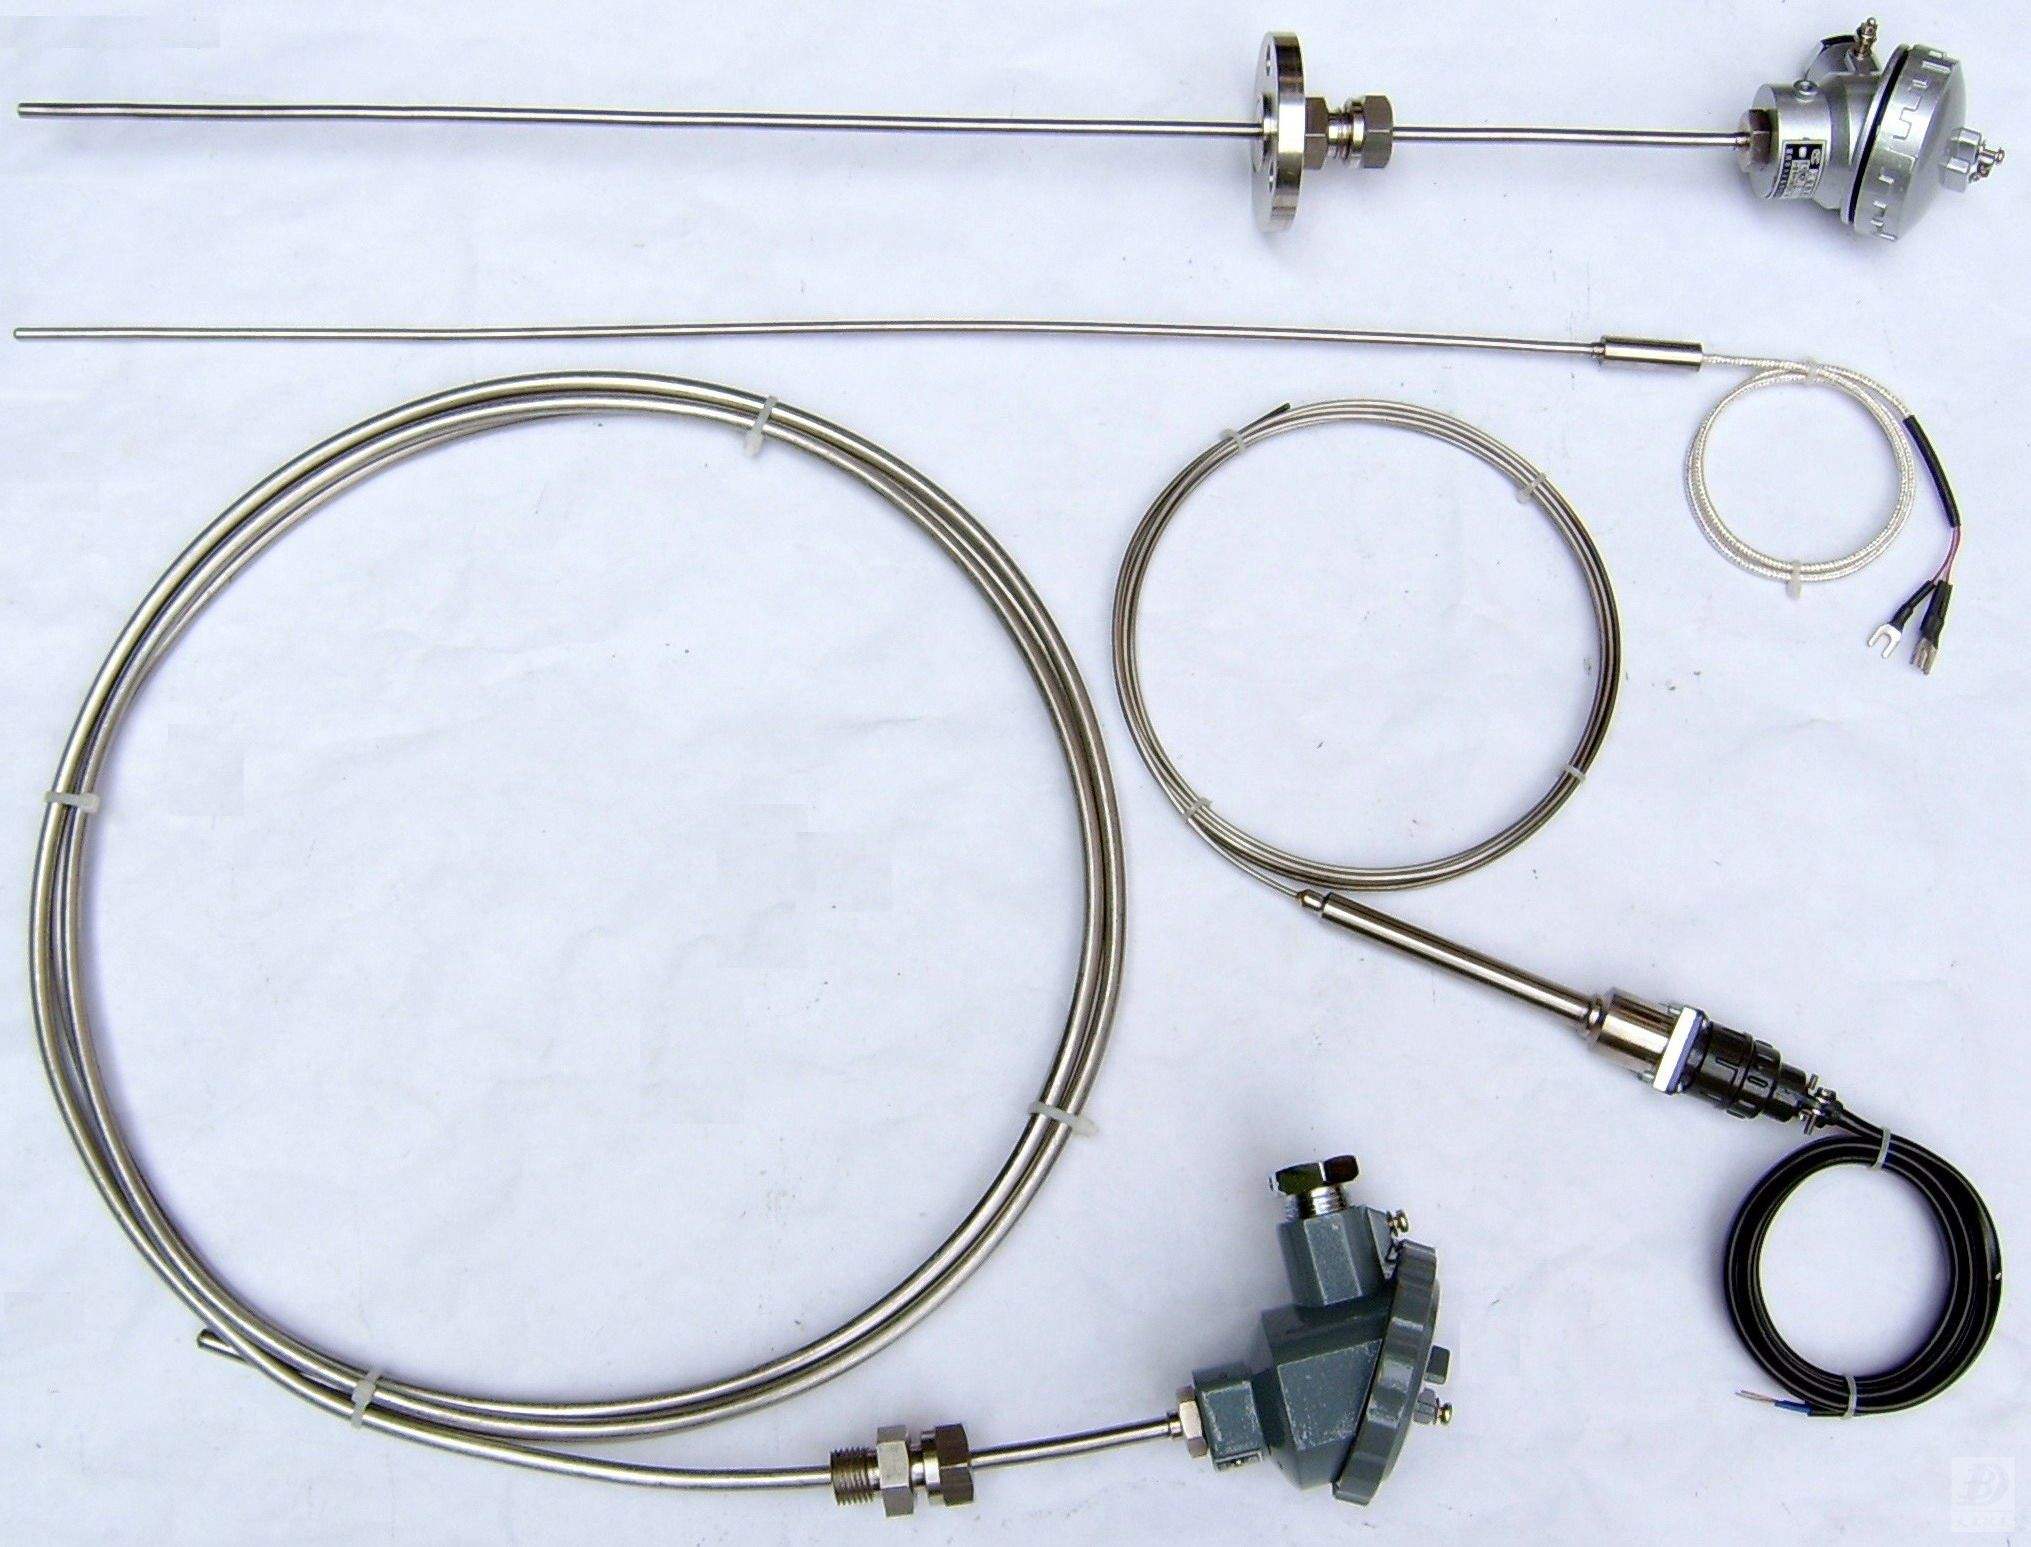 WRNK-191 armored thermocouple